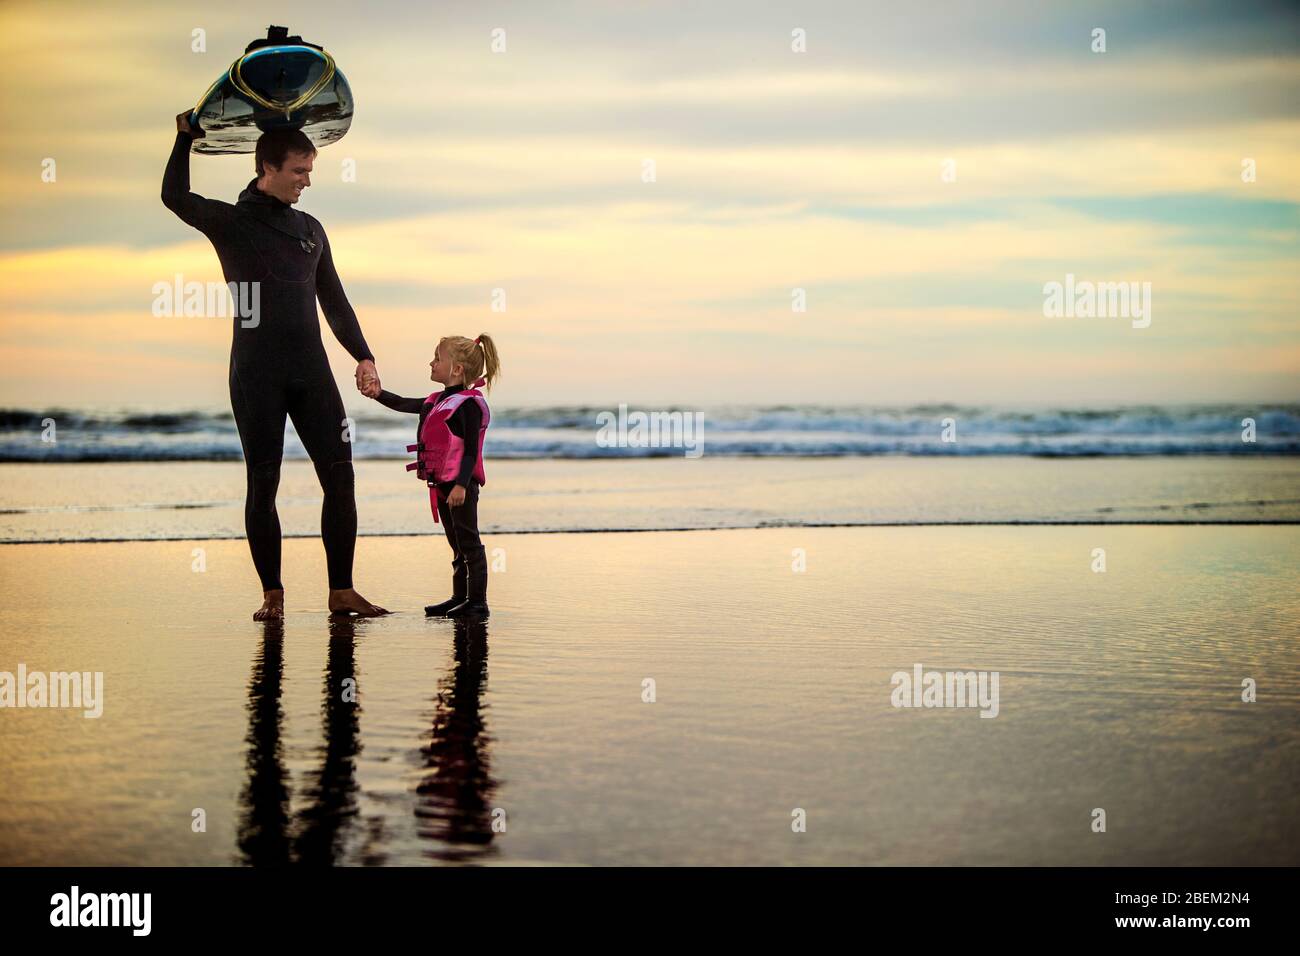 Surfer holding hands with his young daughter at the beach Stock Photo